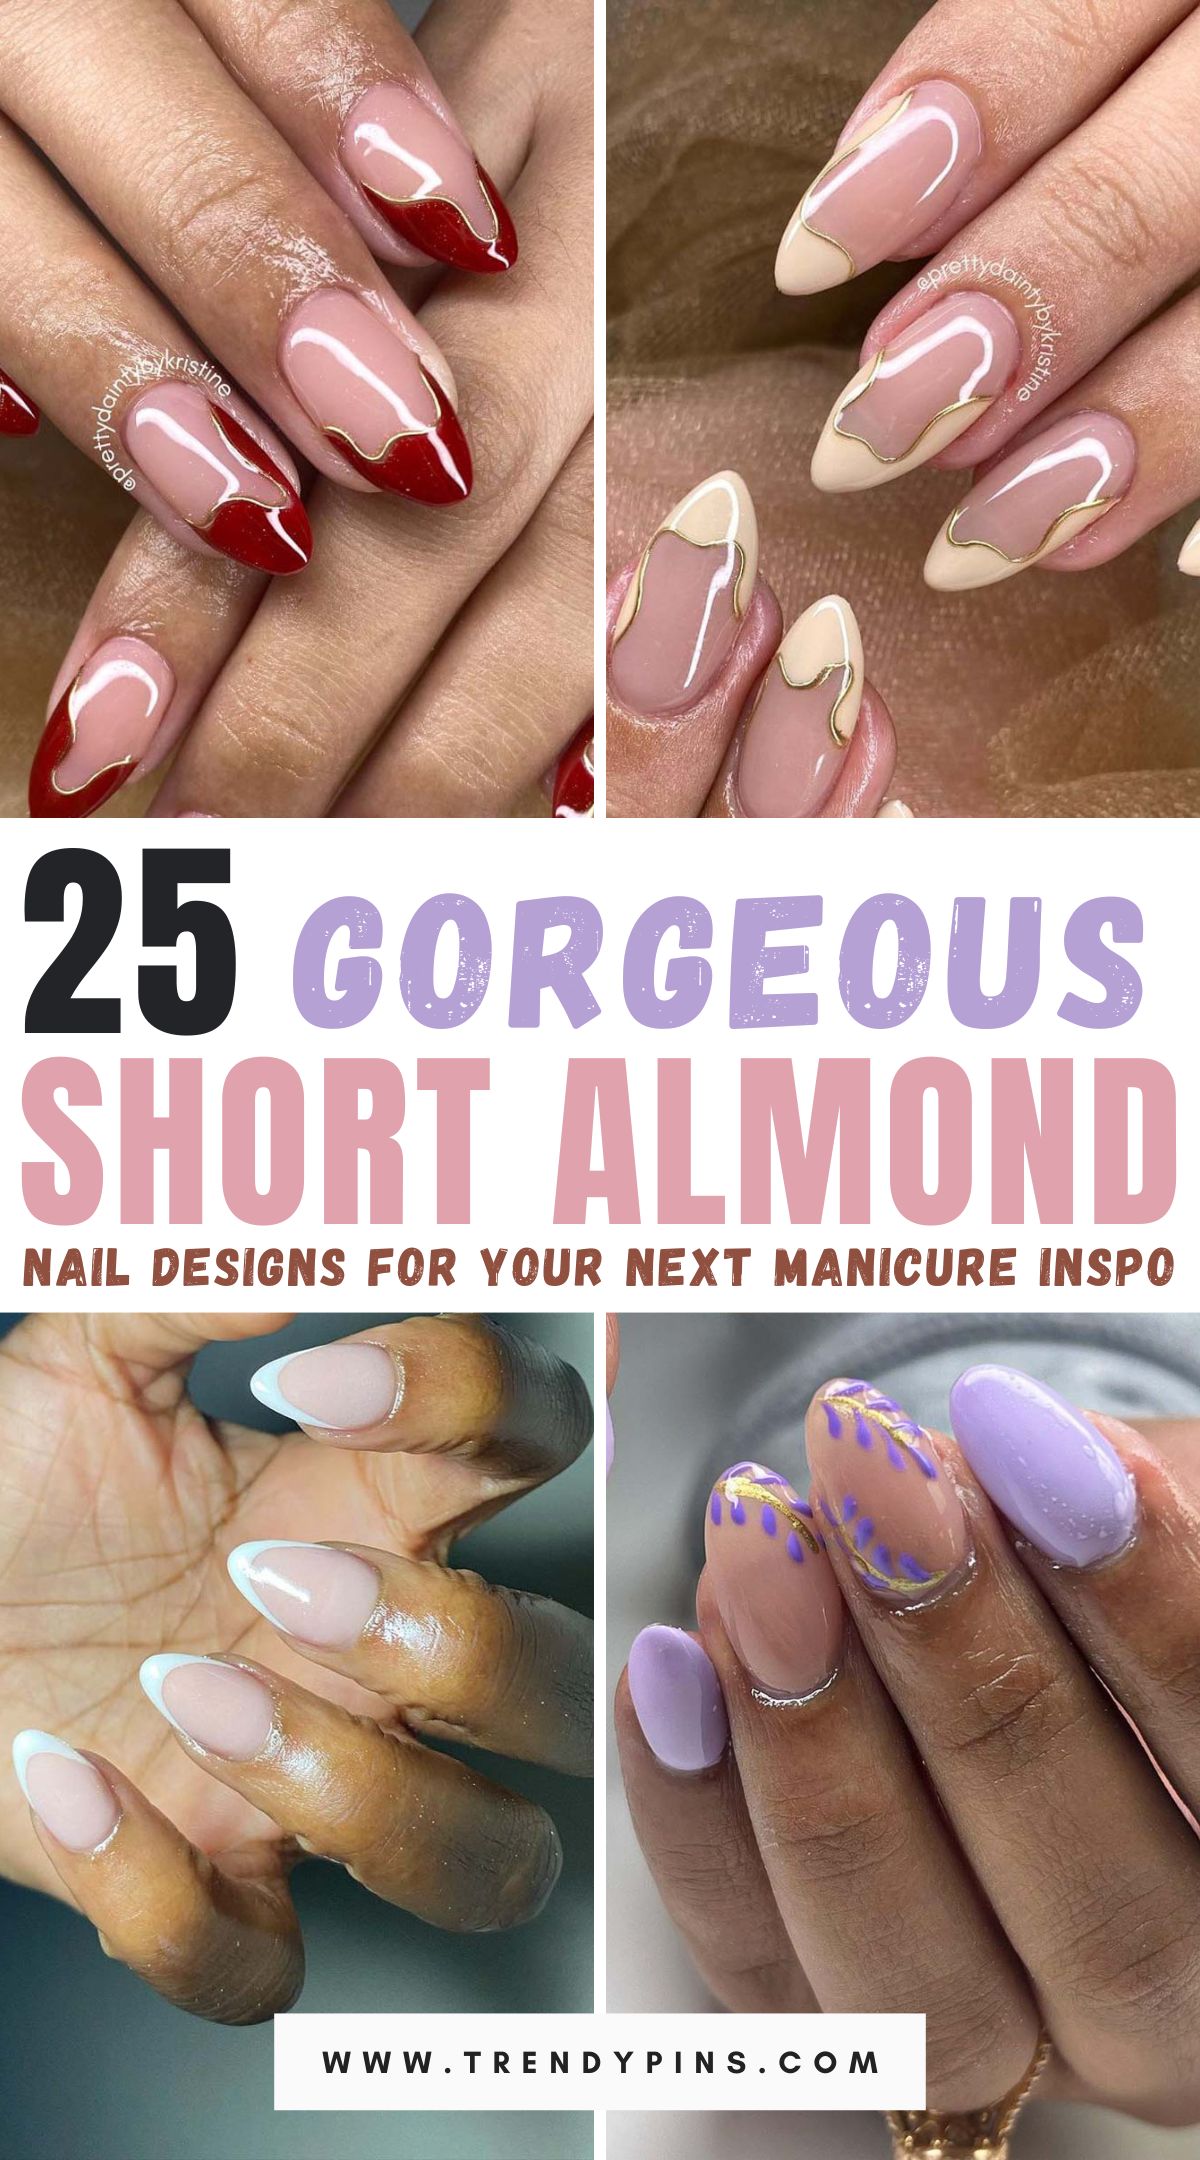 Explore 25 chic and creative short almond nail designs perfect for your next salon visit. Get inspired and elevate your manicure game!